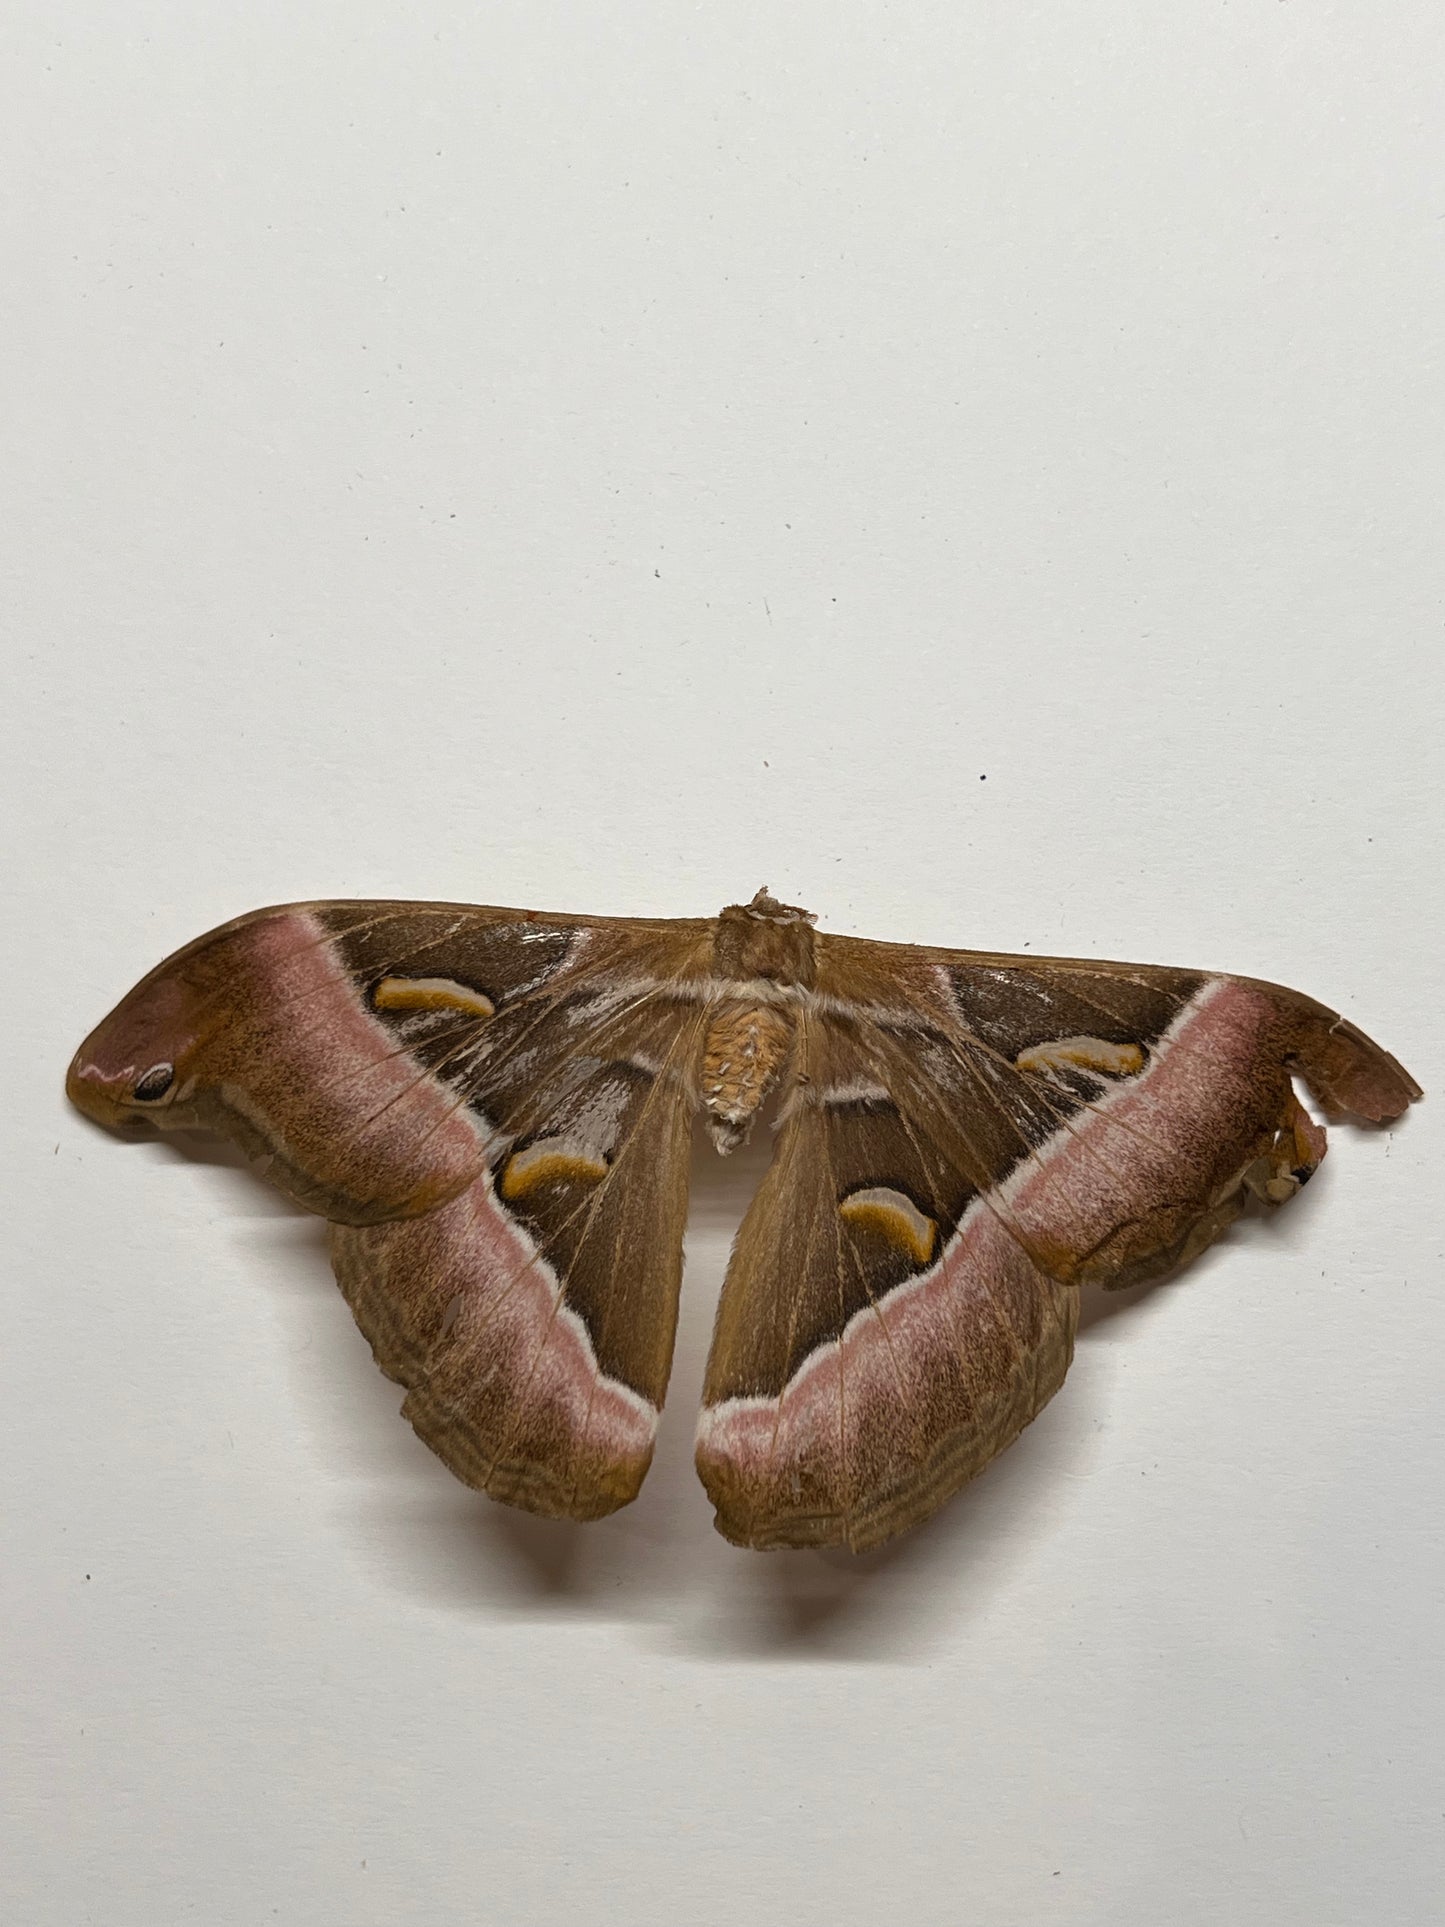 Cynthia Moth - Natural Death Papered Specimen